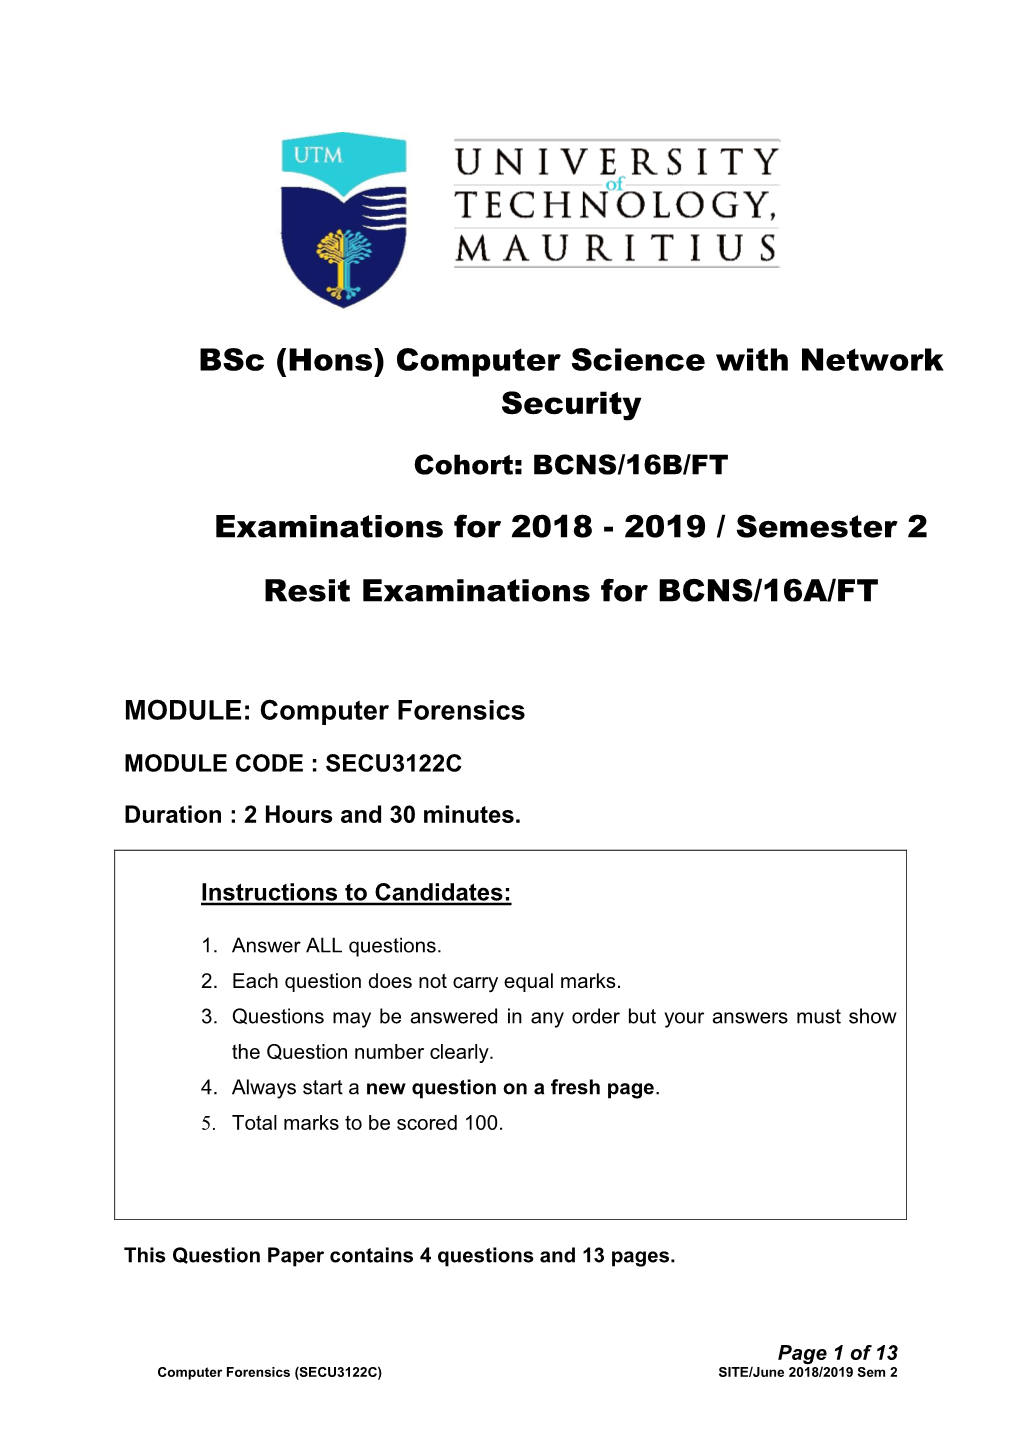 2019 / Semester 2 Resit Examinations for BCNS/16A/FT